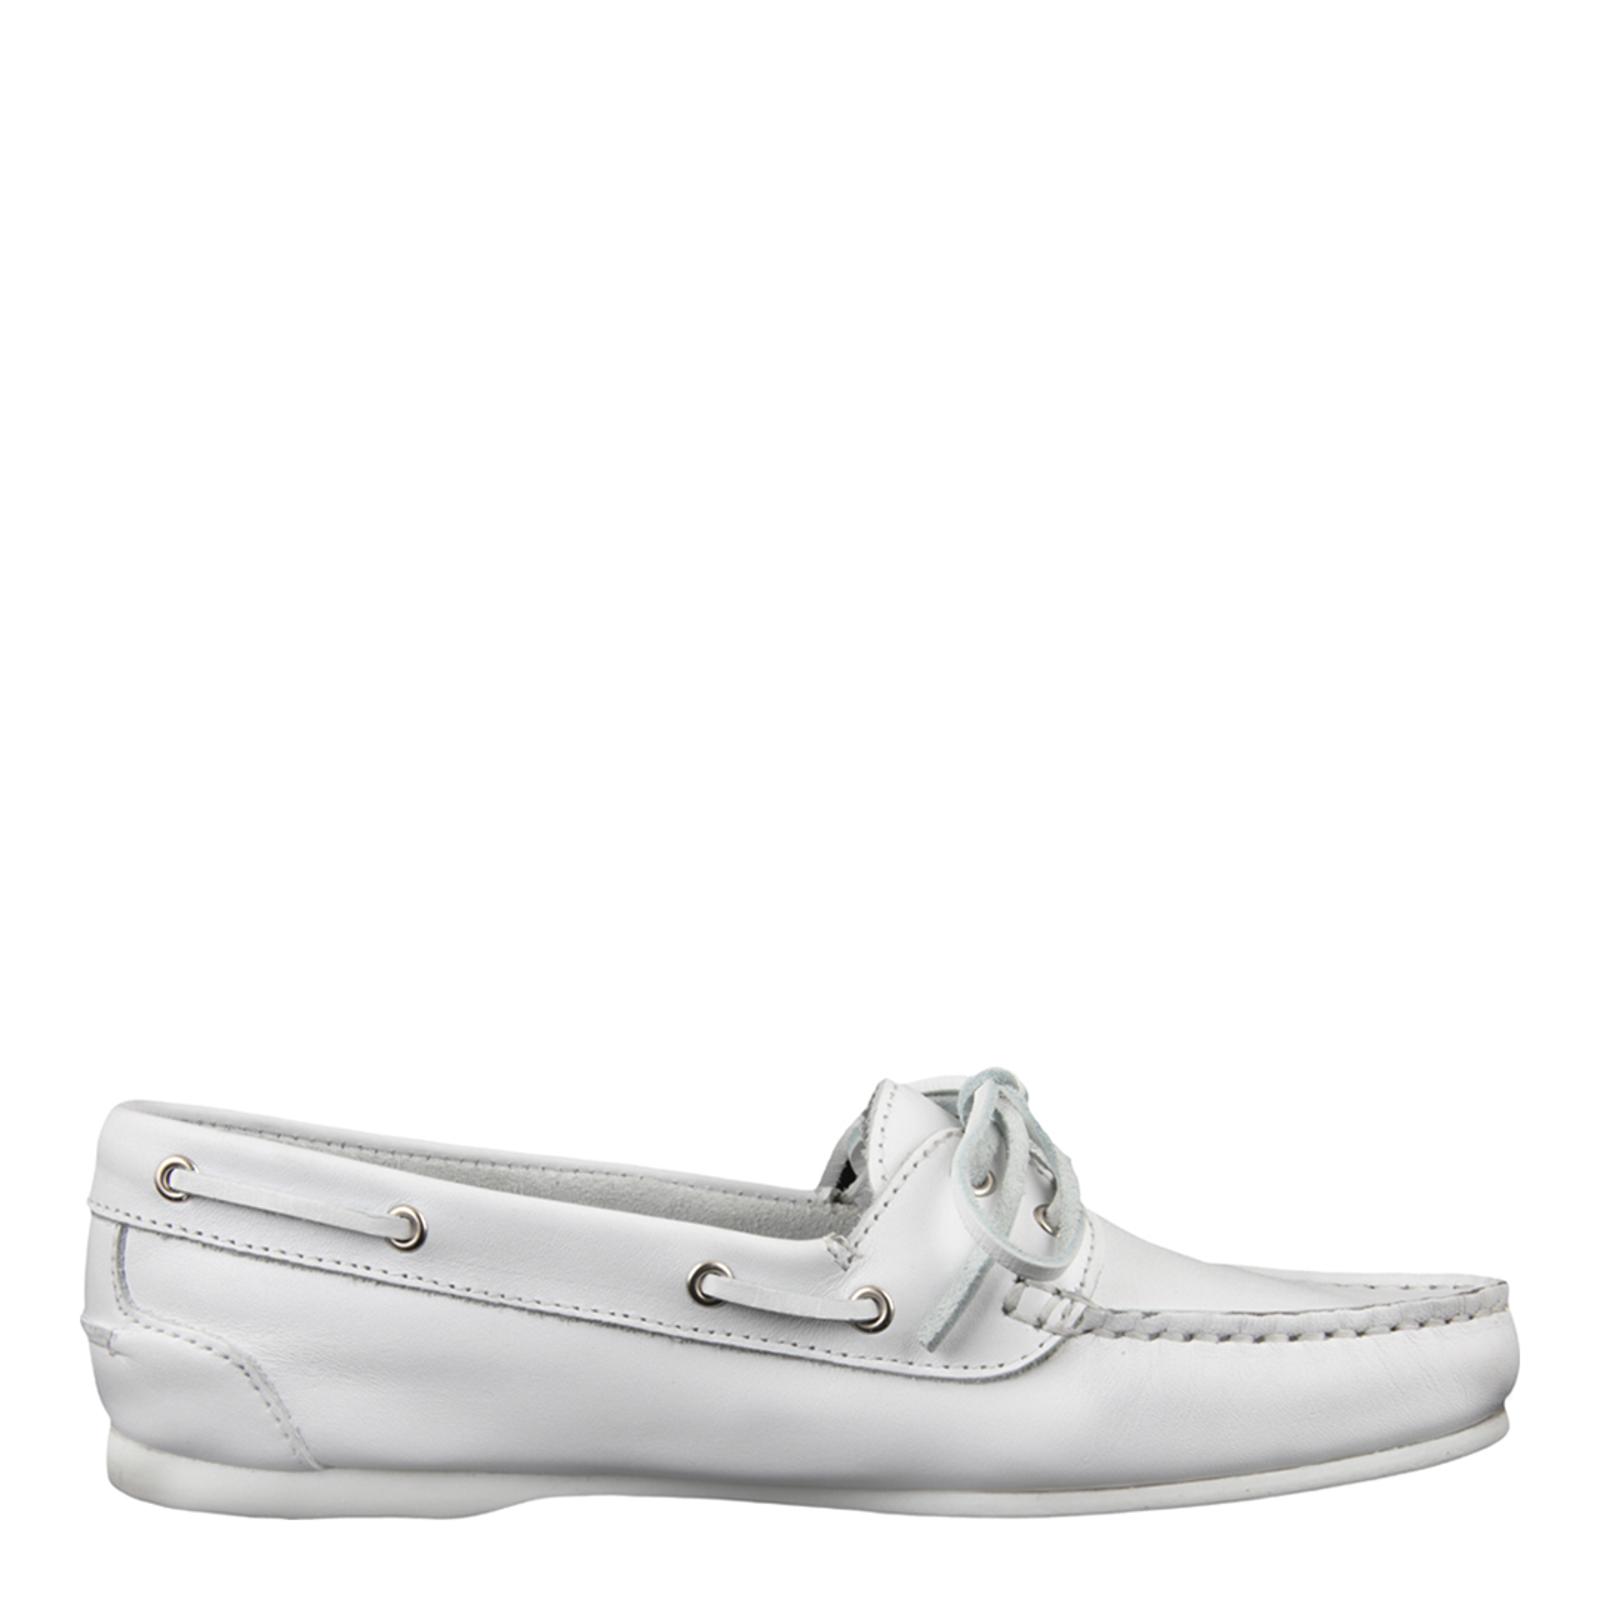 Women's White Leather Boat Shoes - BrandAlley